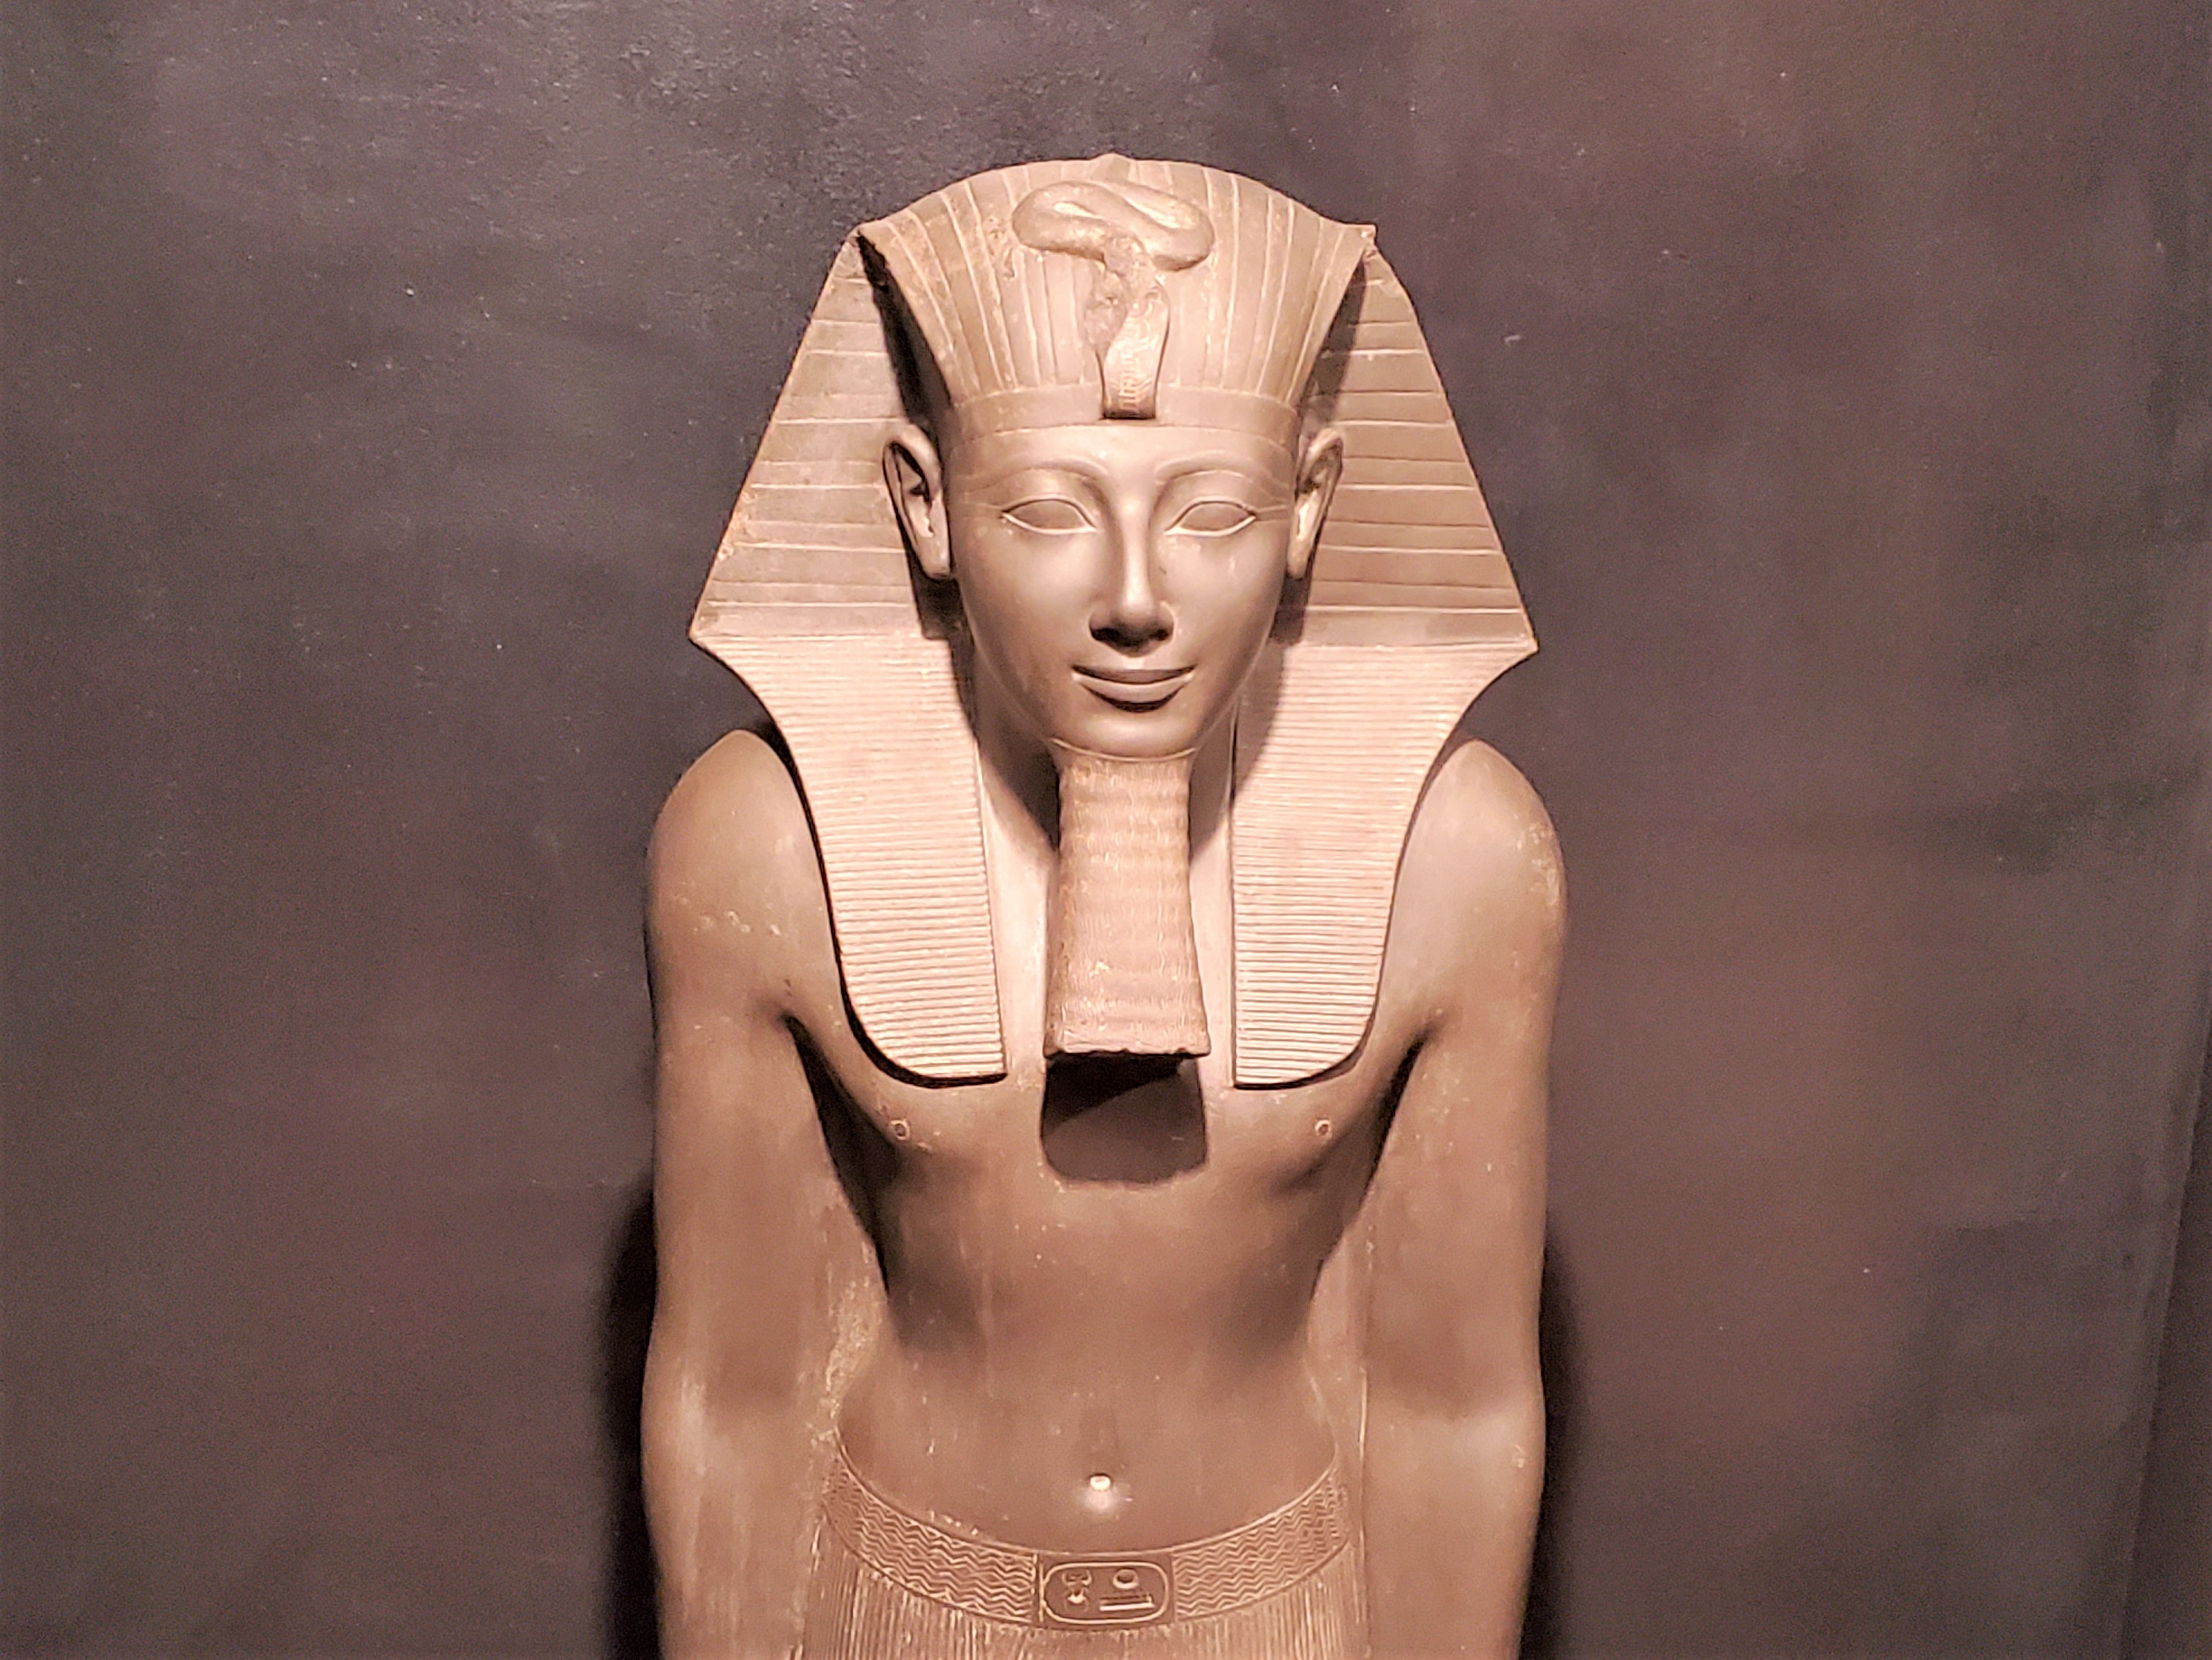 Statue at Luxor Museum, Egypt